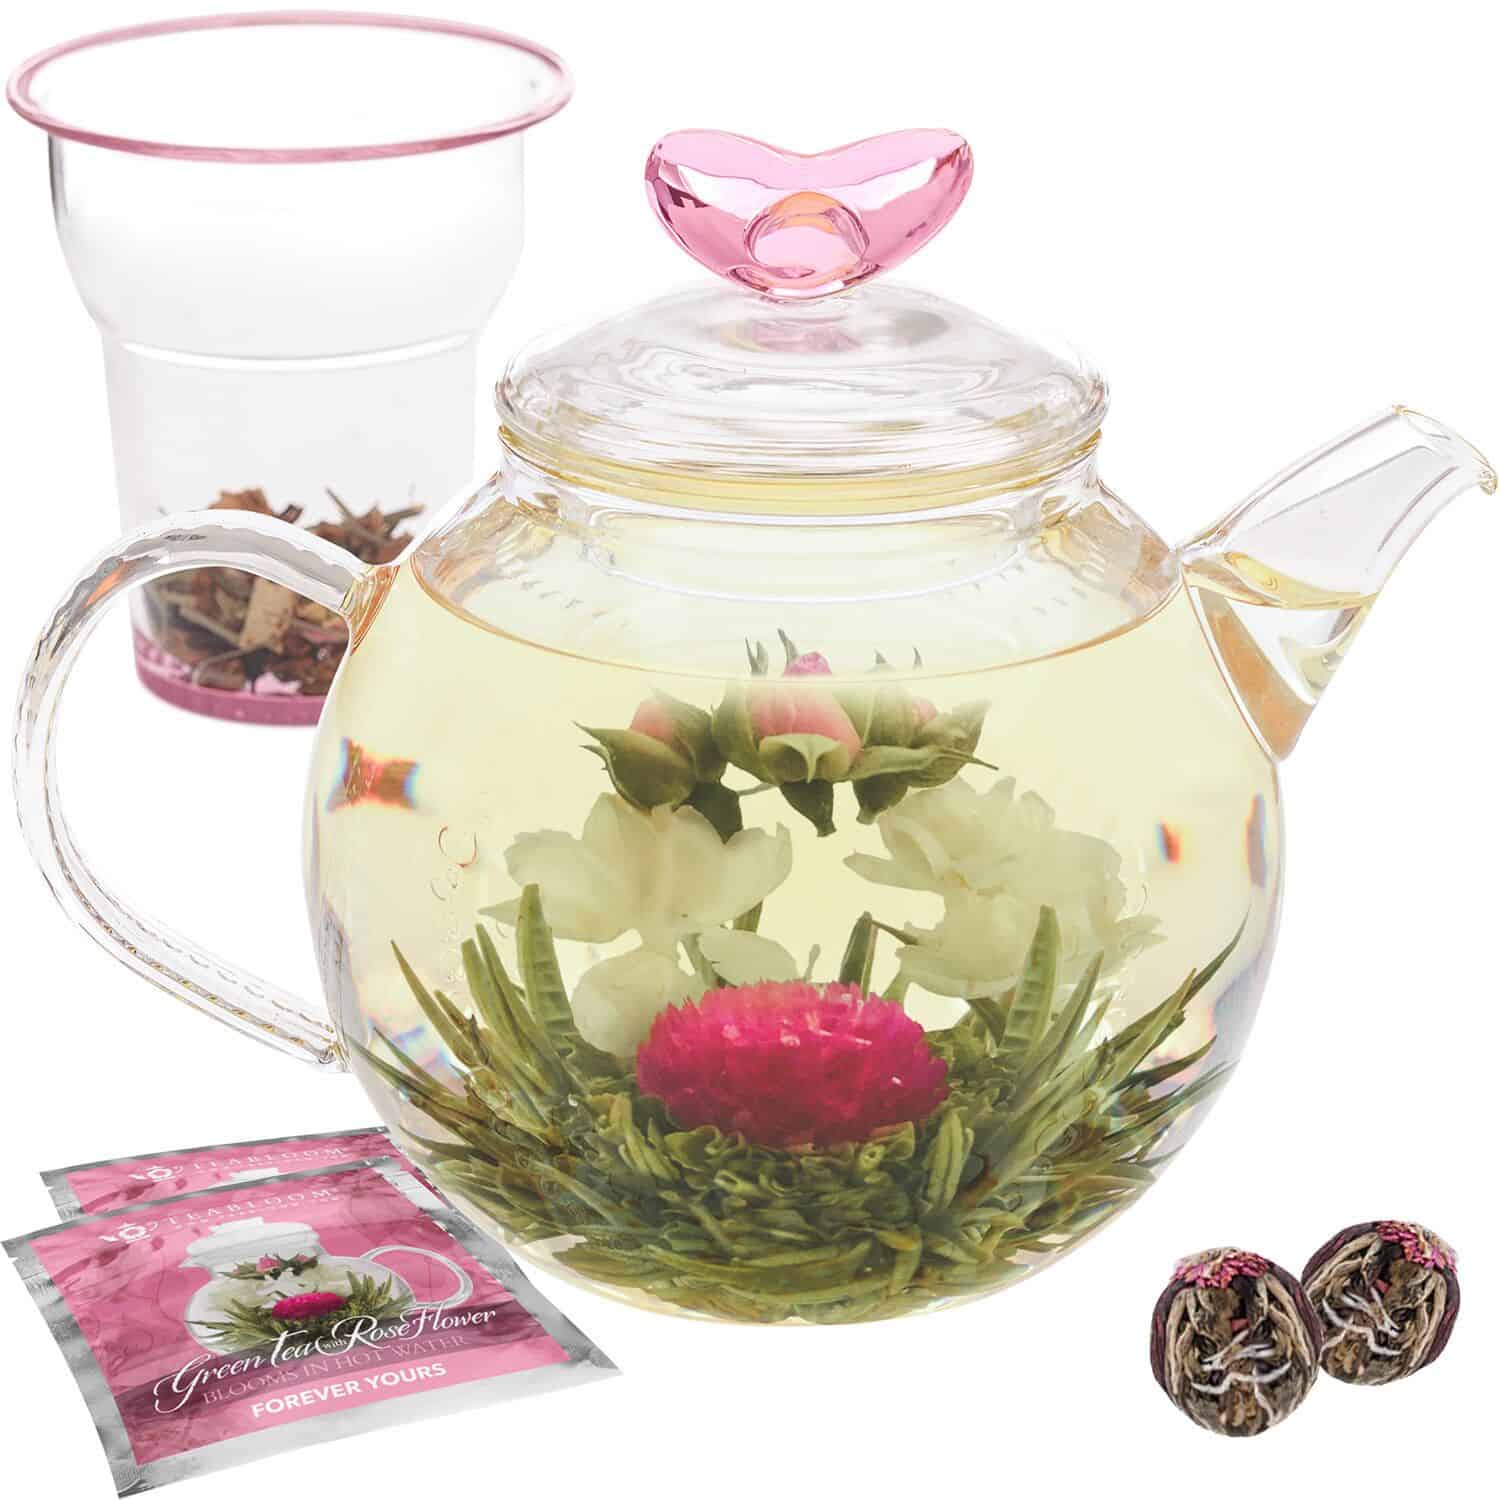 Clear teapot with pink and white flowers in it.